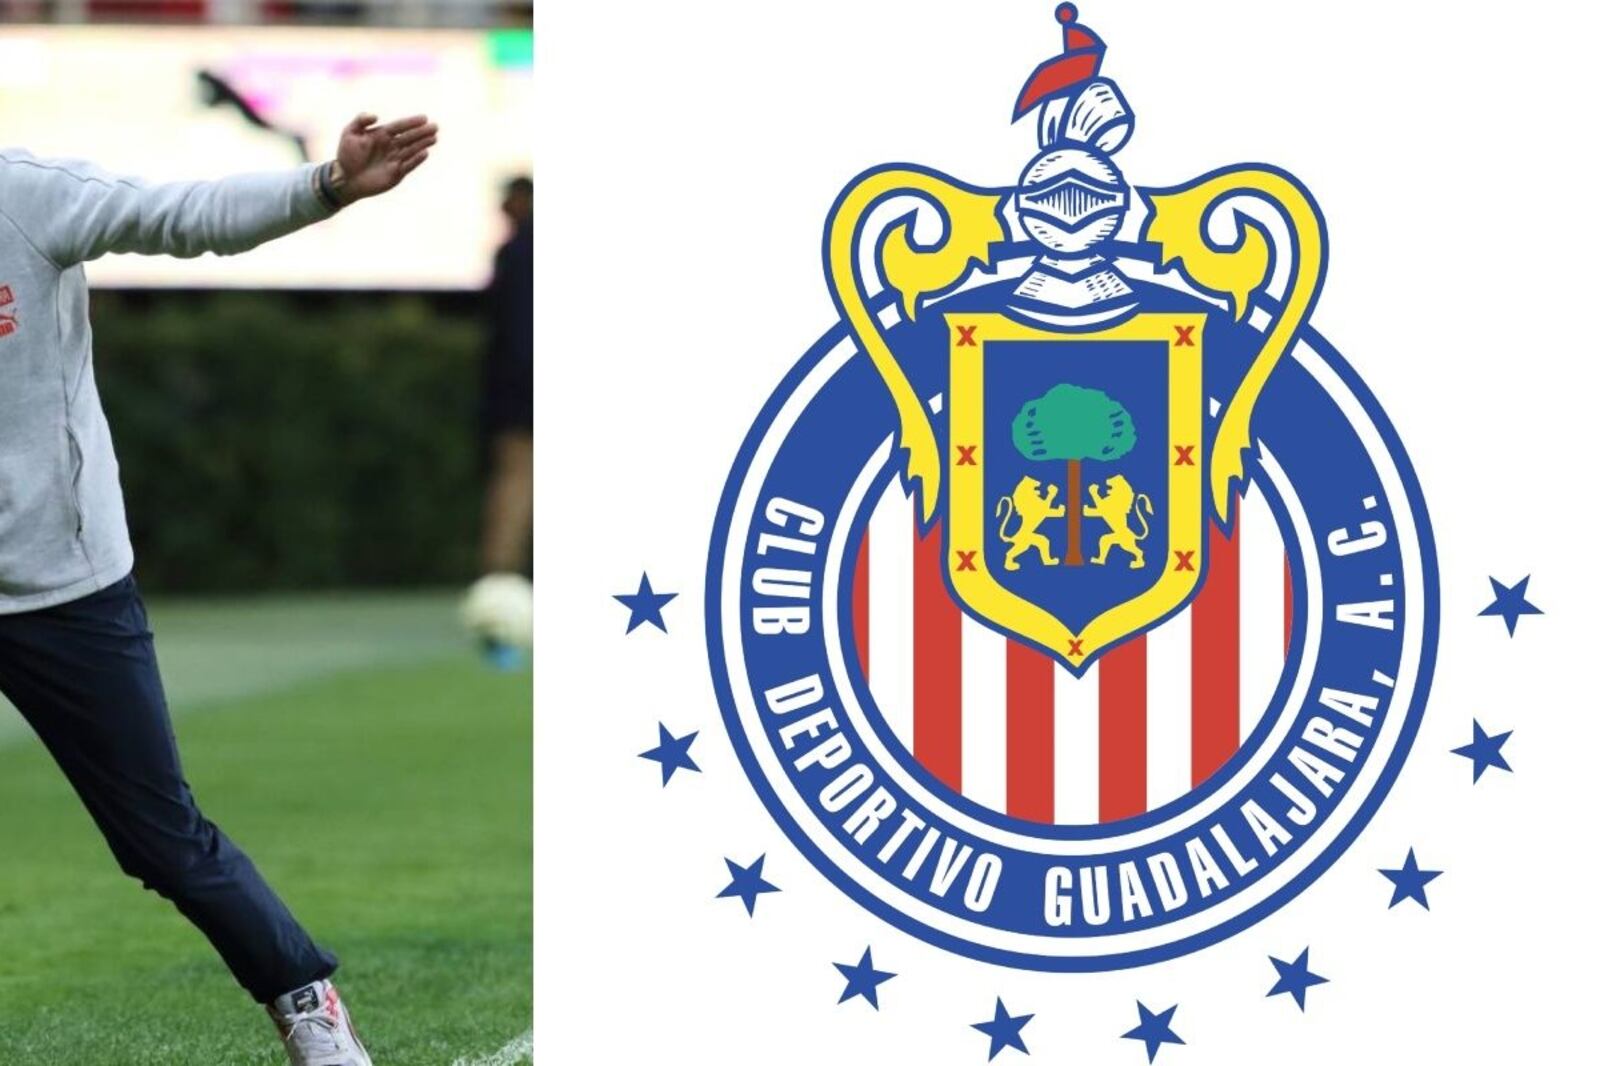 After losing the championship against Tigres, Paunovic's decision to continue at Chivas